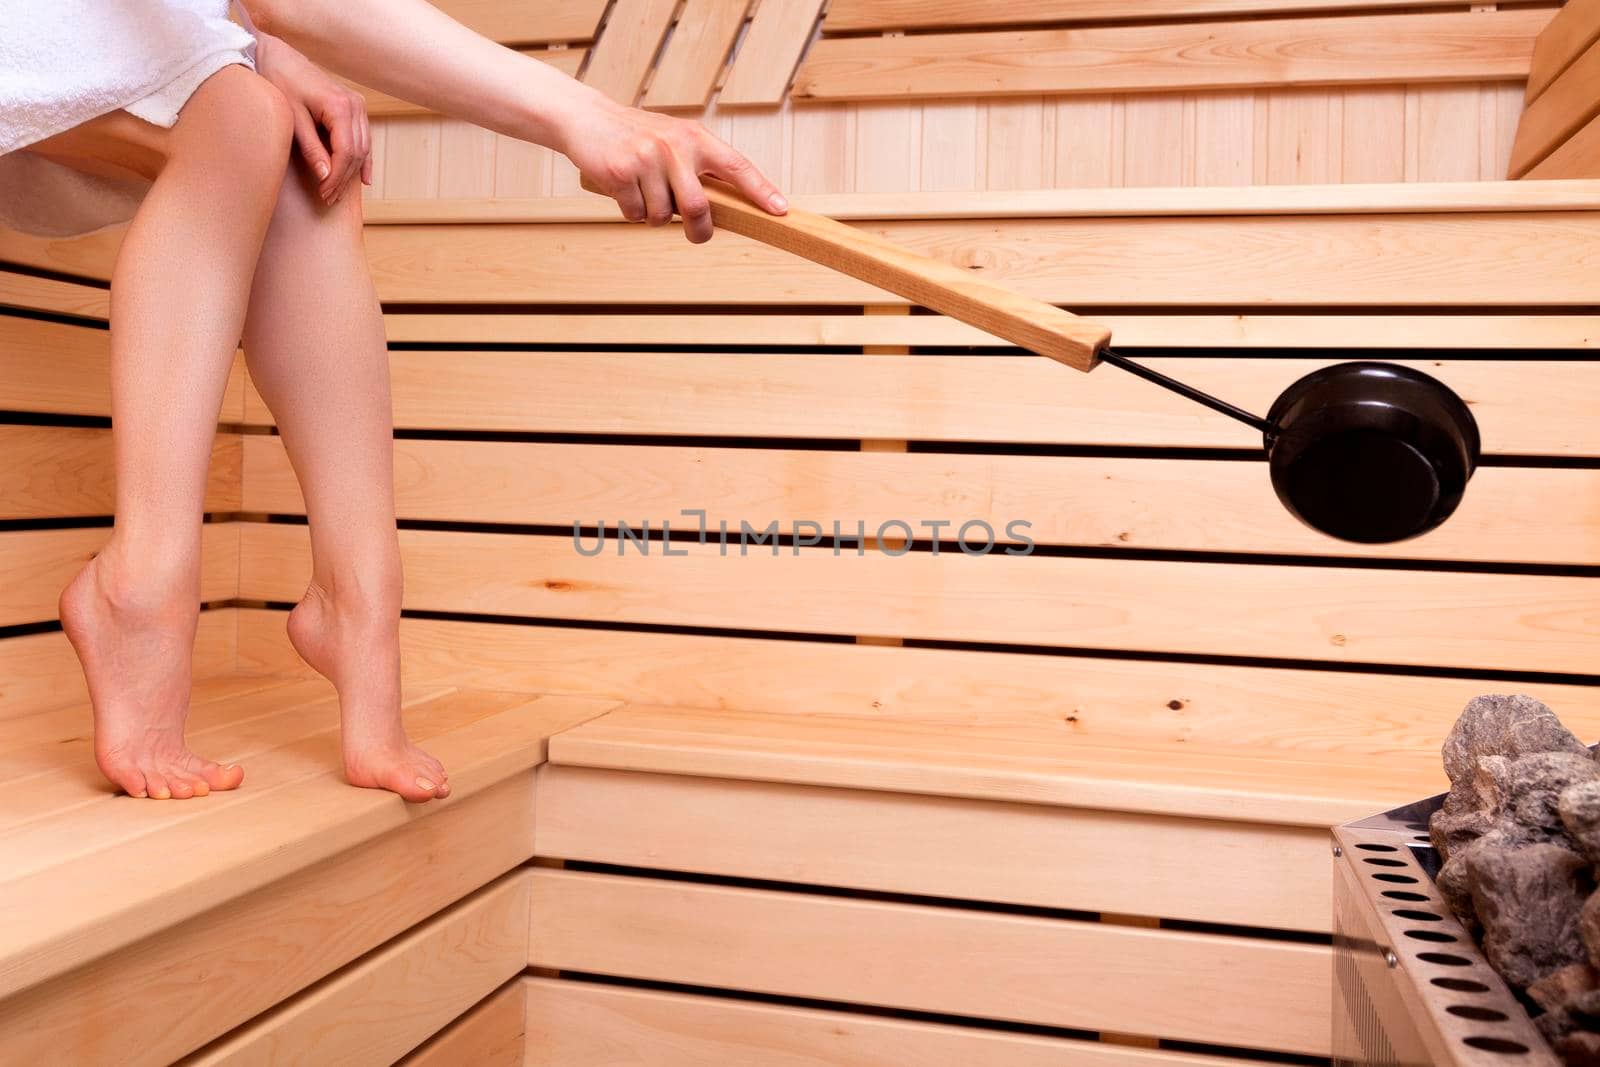 Woman pours water on a stones in a stove with a ladle. Traditional sauna.